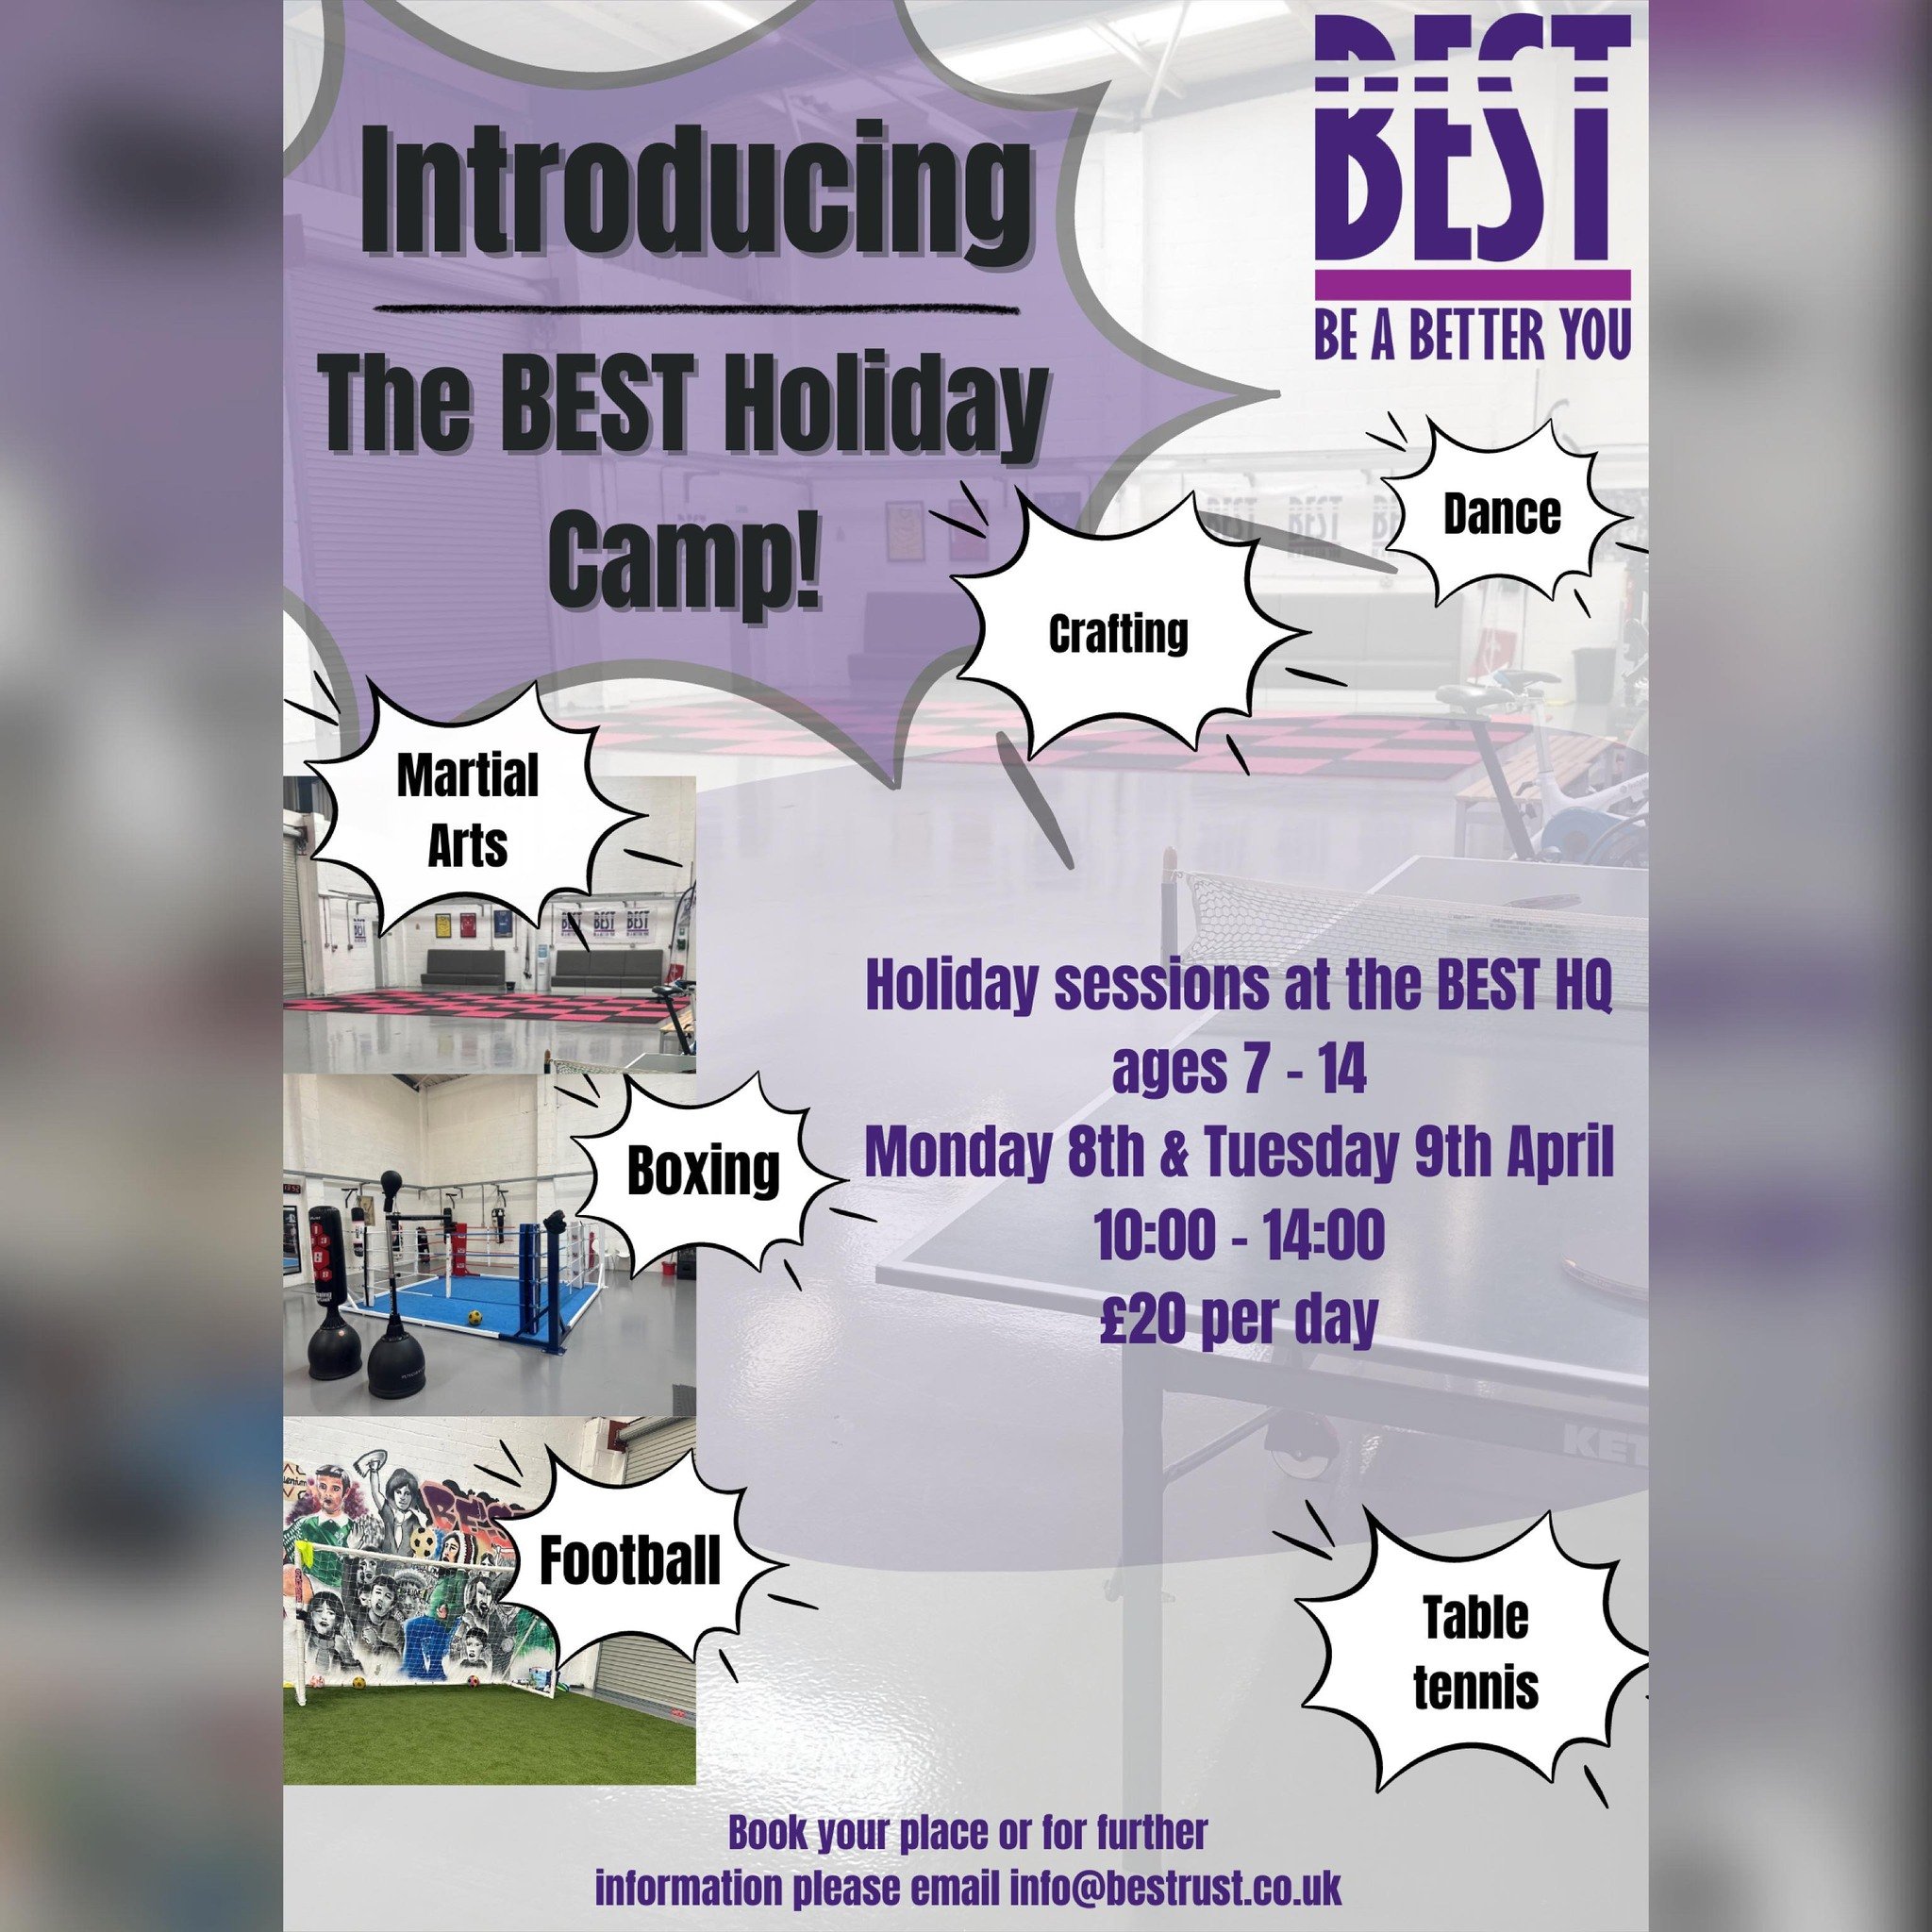 💜💥INTRODUCING THE BEST HOLIDAY CAMP💥💜
BEST are thrilled to announce our in house holiday camp based at our HQ at Athena Avenue for children aged 7 - 14. 

 We will be running over 2 days in the easter holidays, on Monday 8th &amp; Tuesday 9th Apr